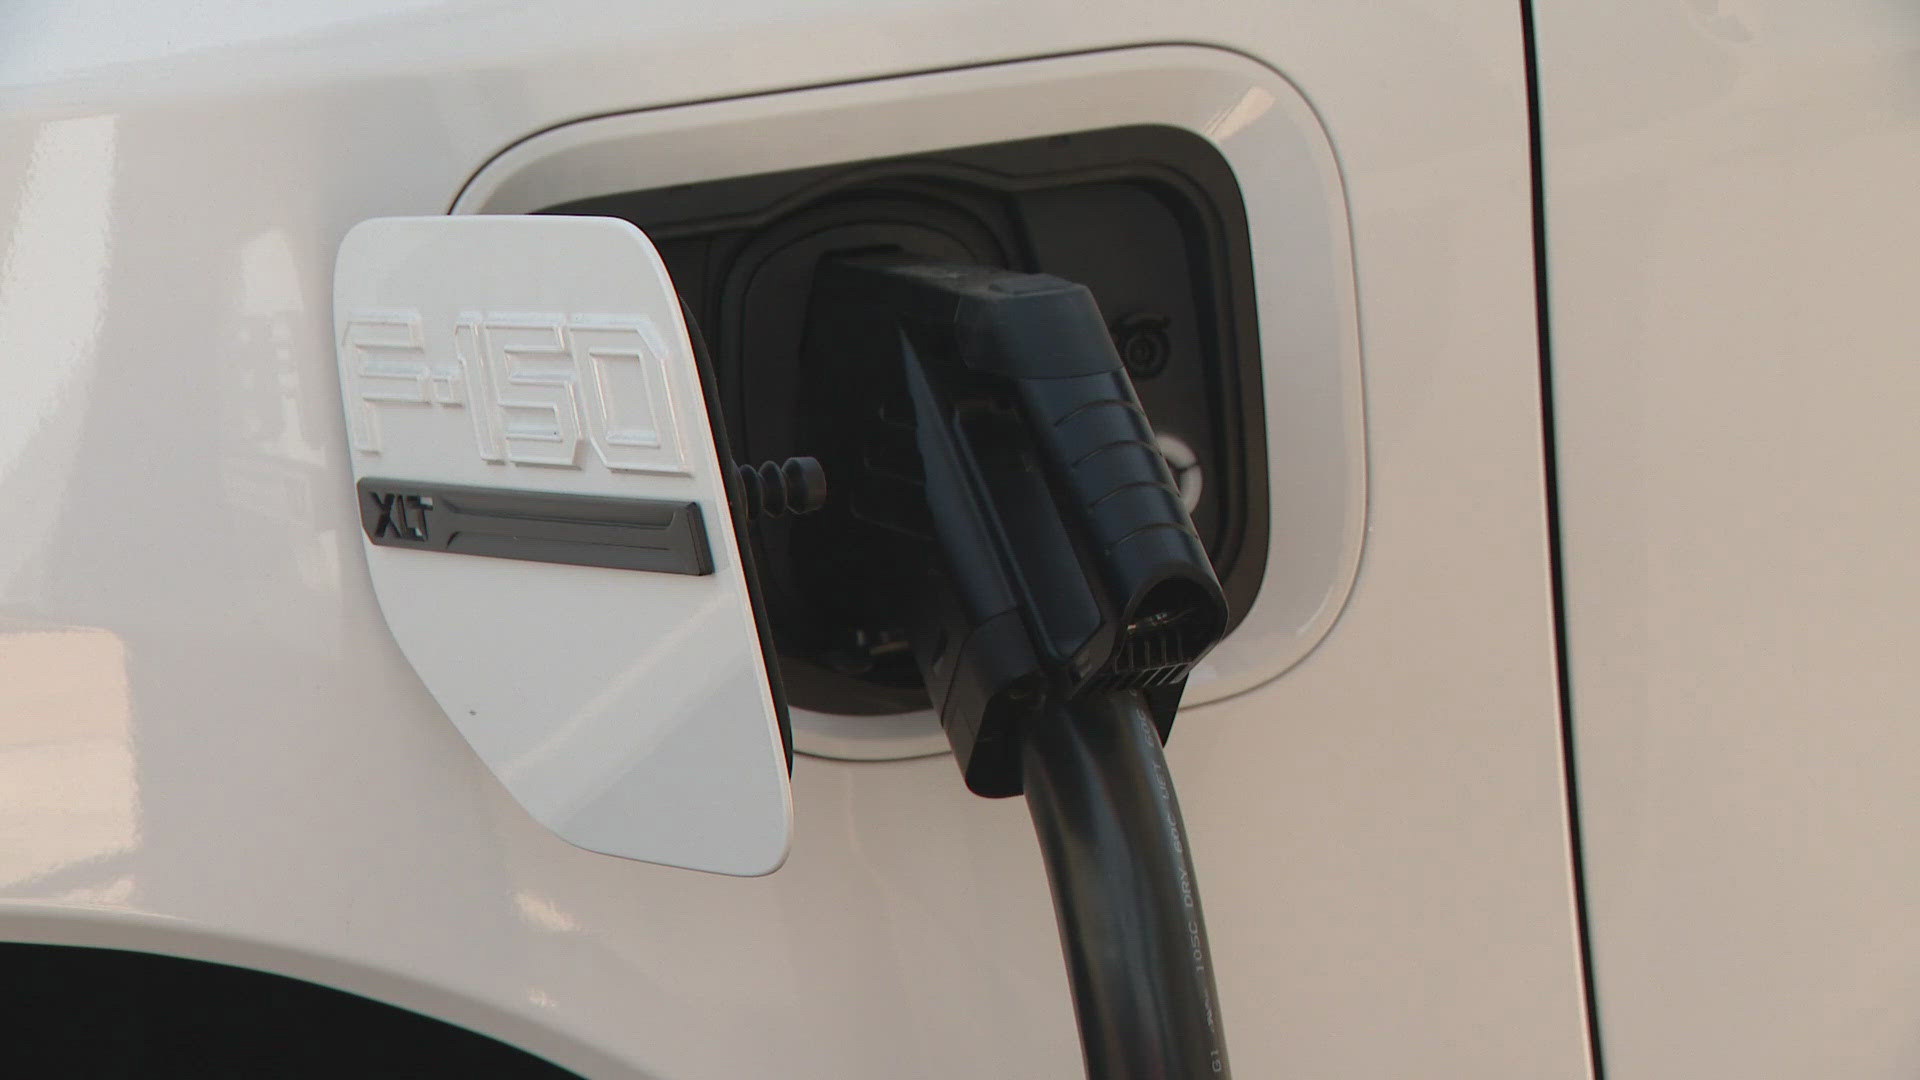 There are many myths when it comes to electric vehicles, from the lack of charging stations to the cost. We went to Ameren for answers.